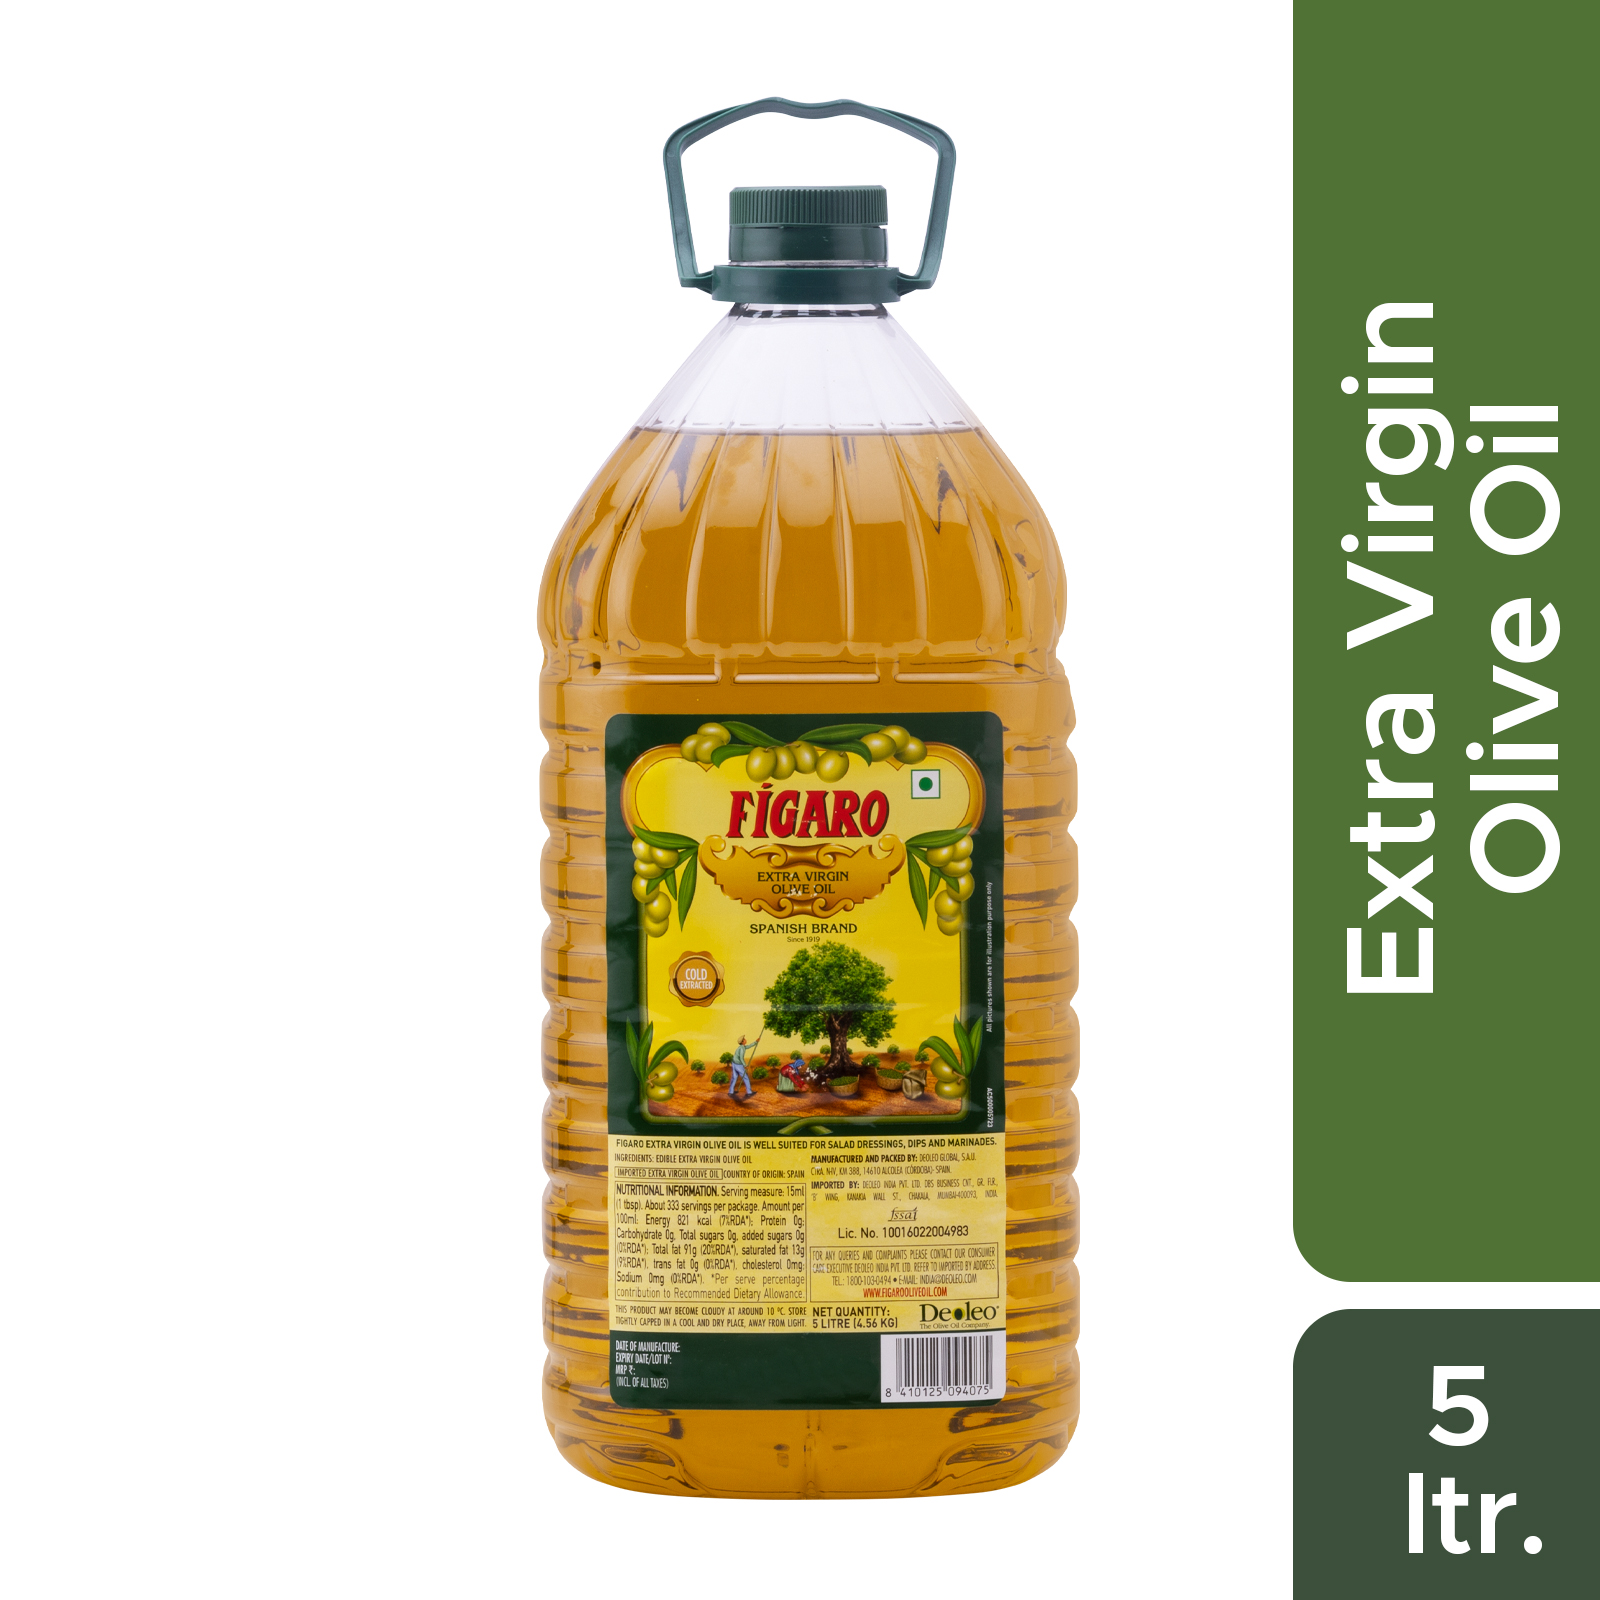 Figaro Extra Virgin Olive Oil – 5L PRODUCT ID: 2376